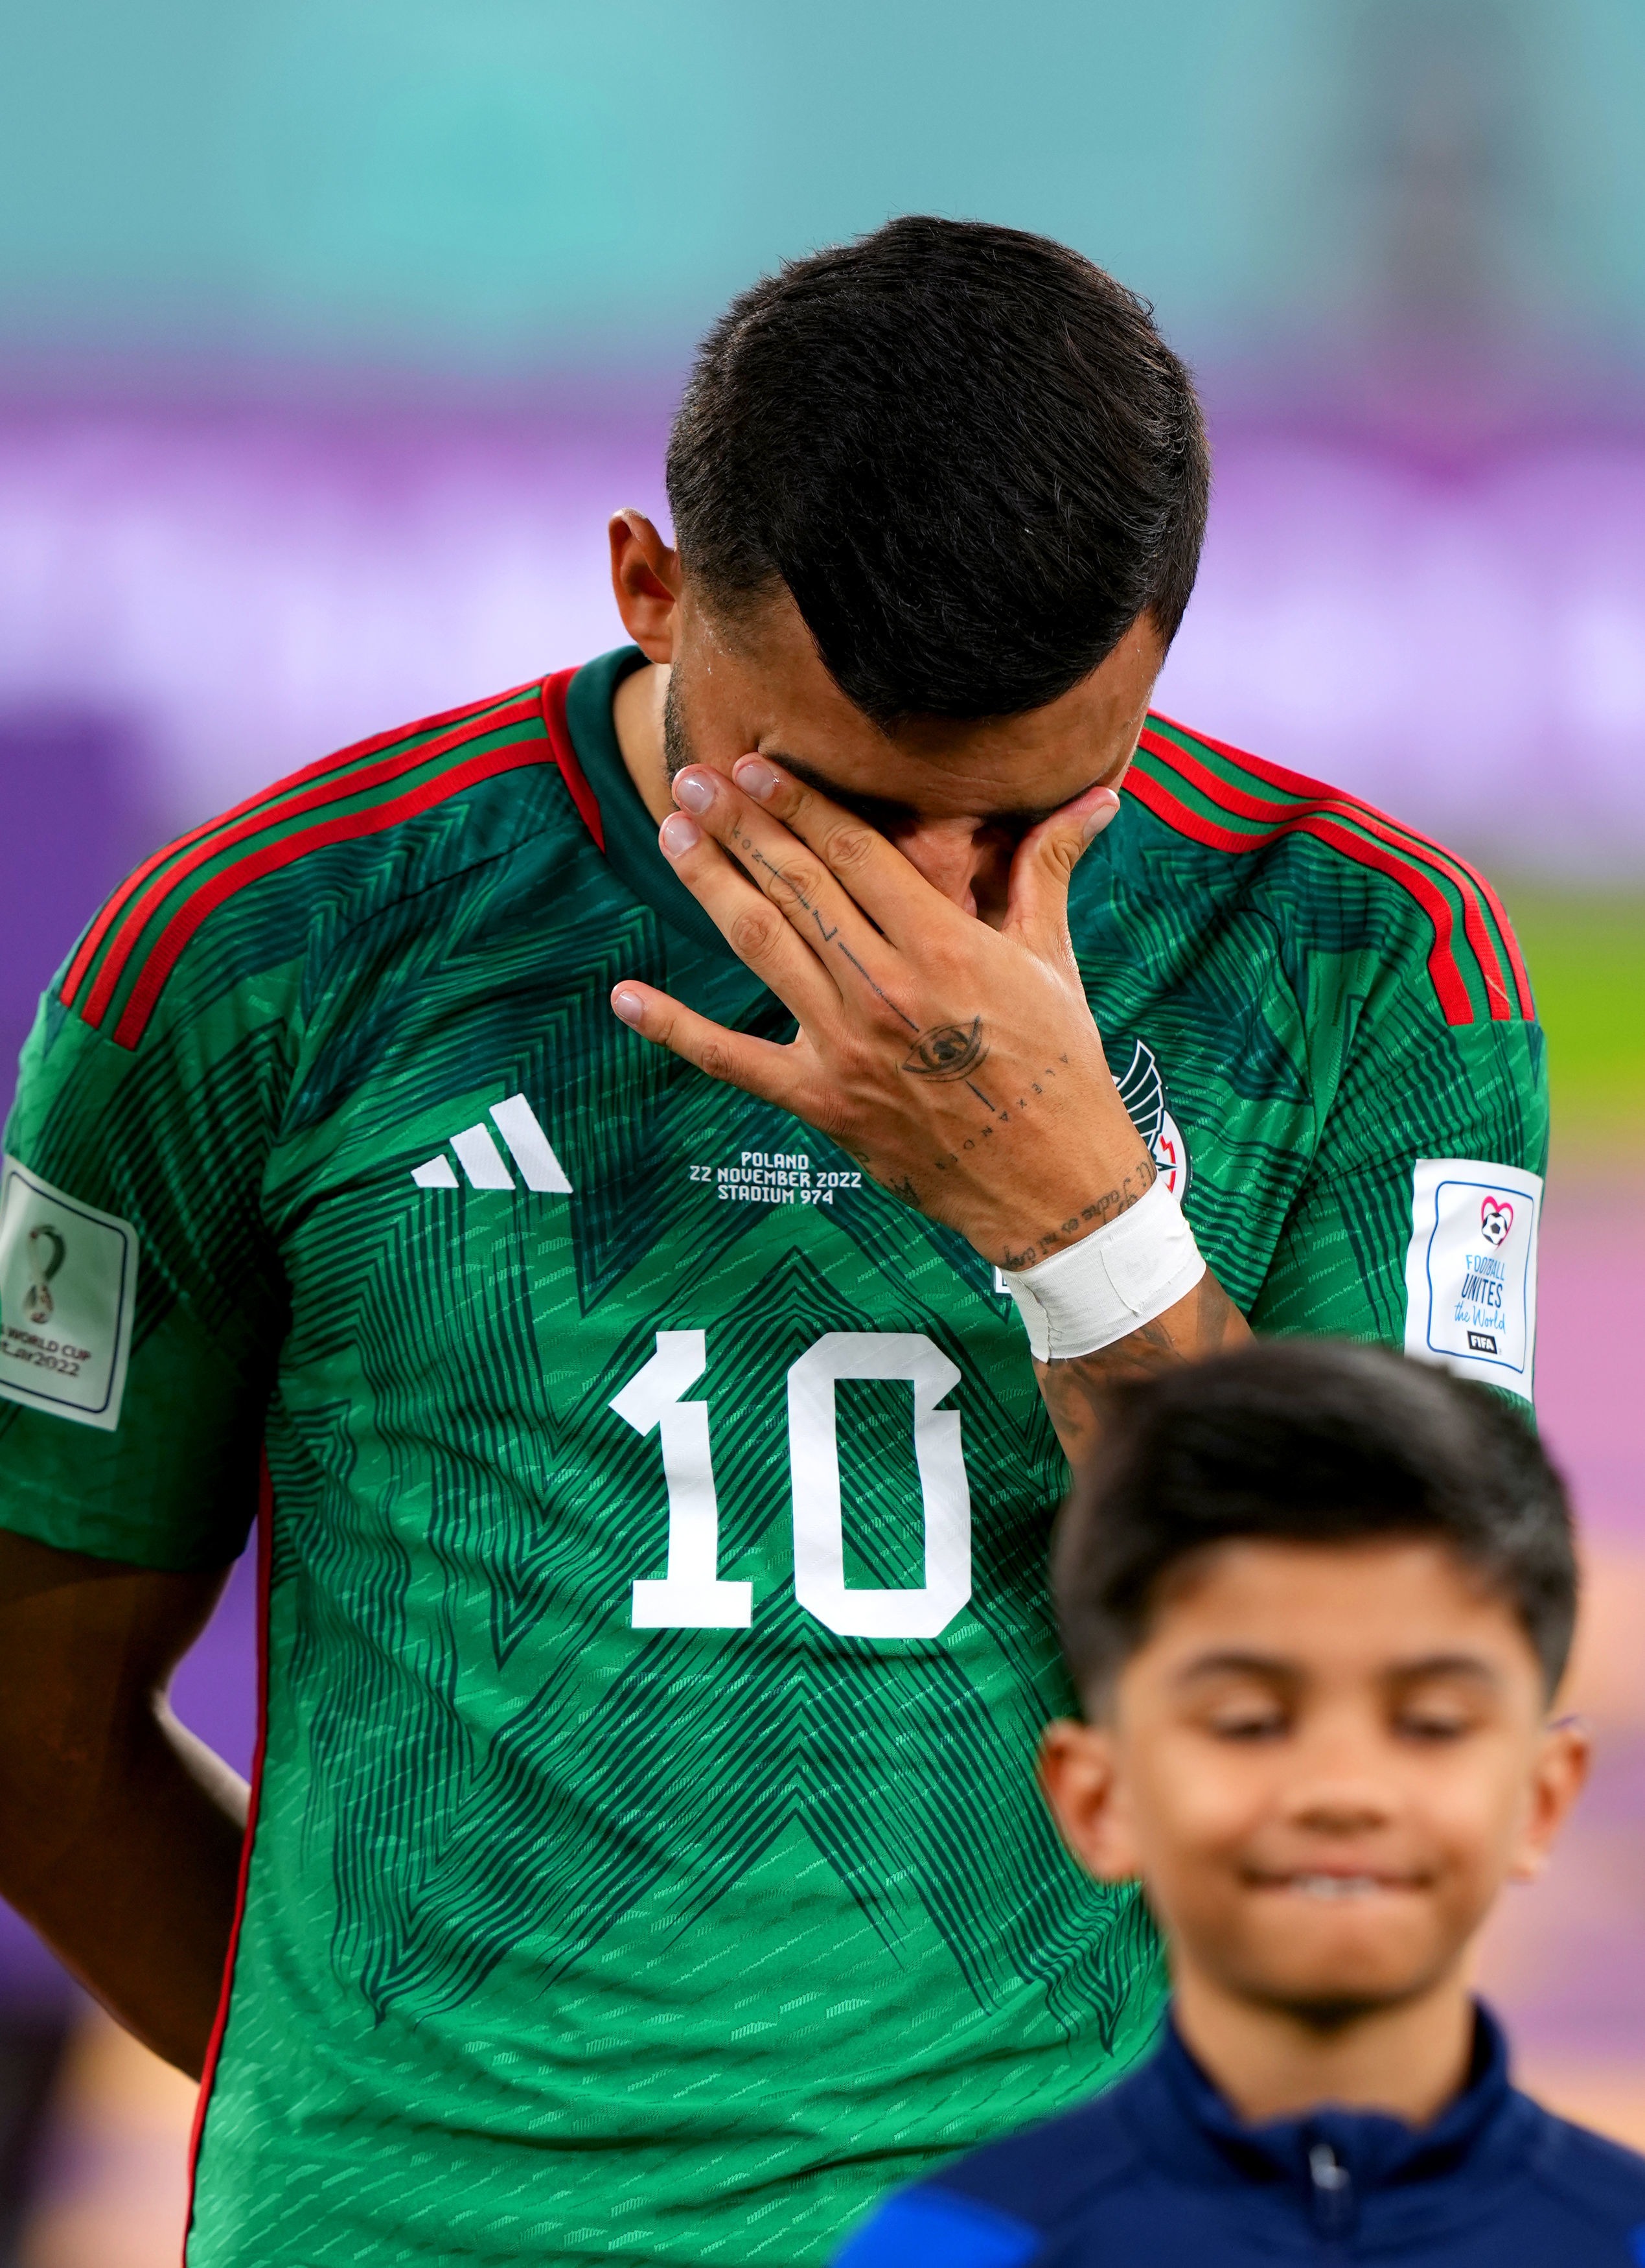 , Chelsea transfer target Alexis Vega breaks down in tears during Mexico national anthem ahead of Poland World Cup clash